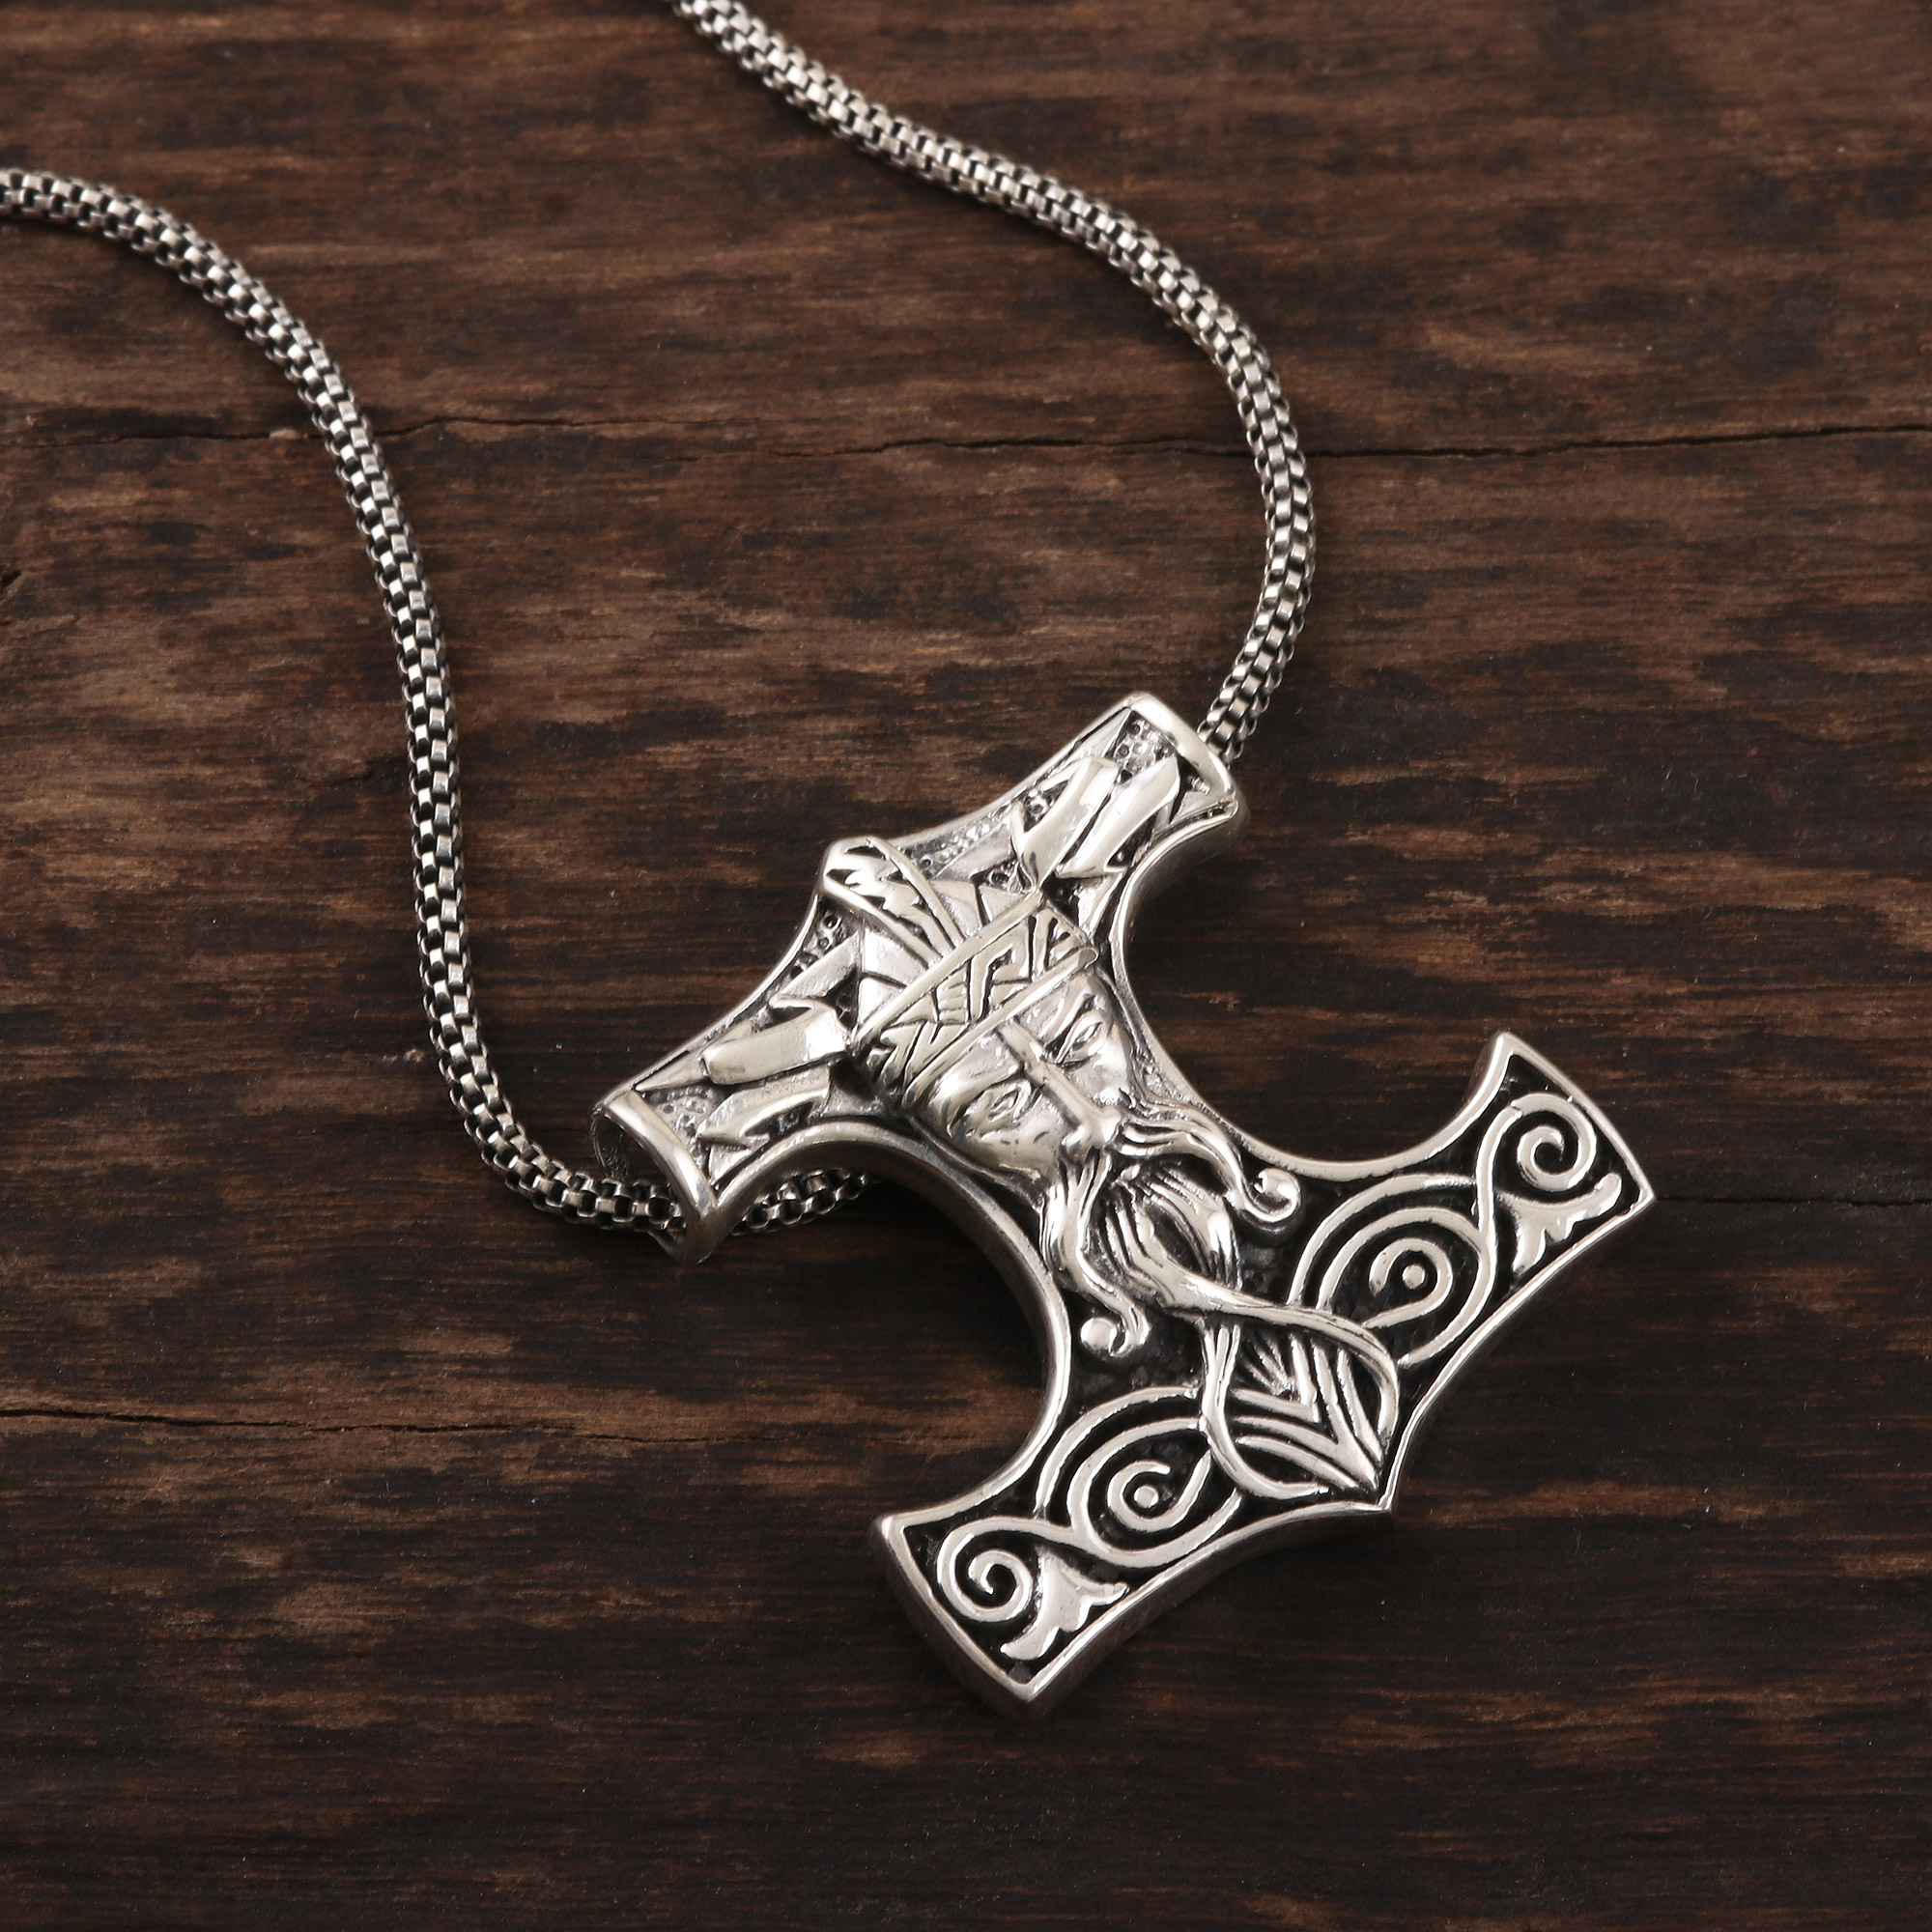 Thor's Hammer Necklace - Surflegacy